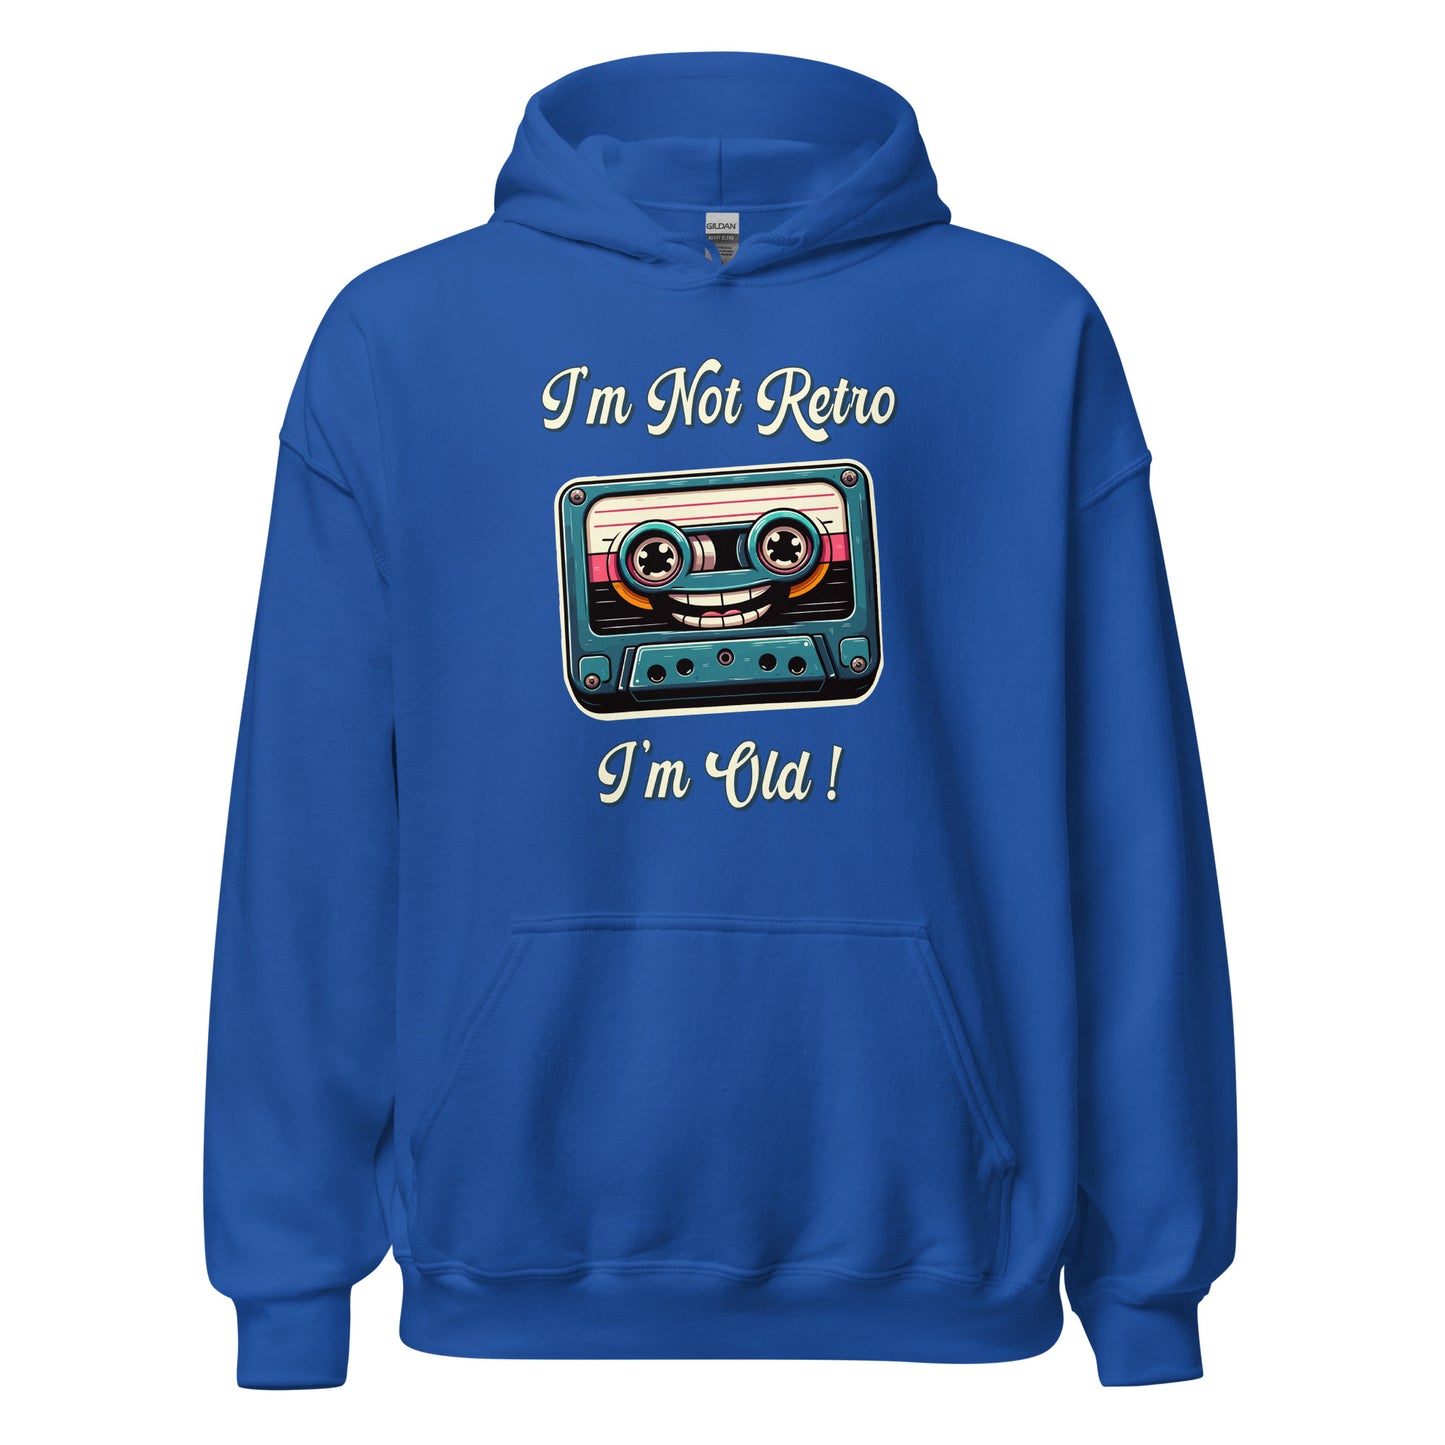 Im not retro im old casette tape hoodie printed by Whistler Shirts with a cassette tape wth a smiley face